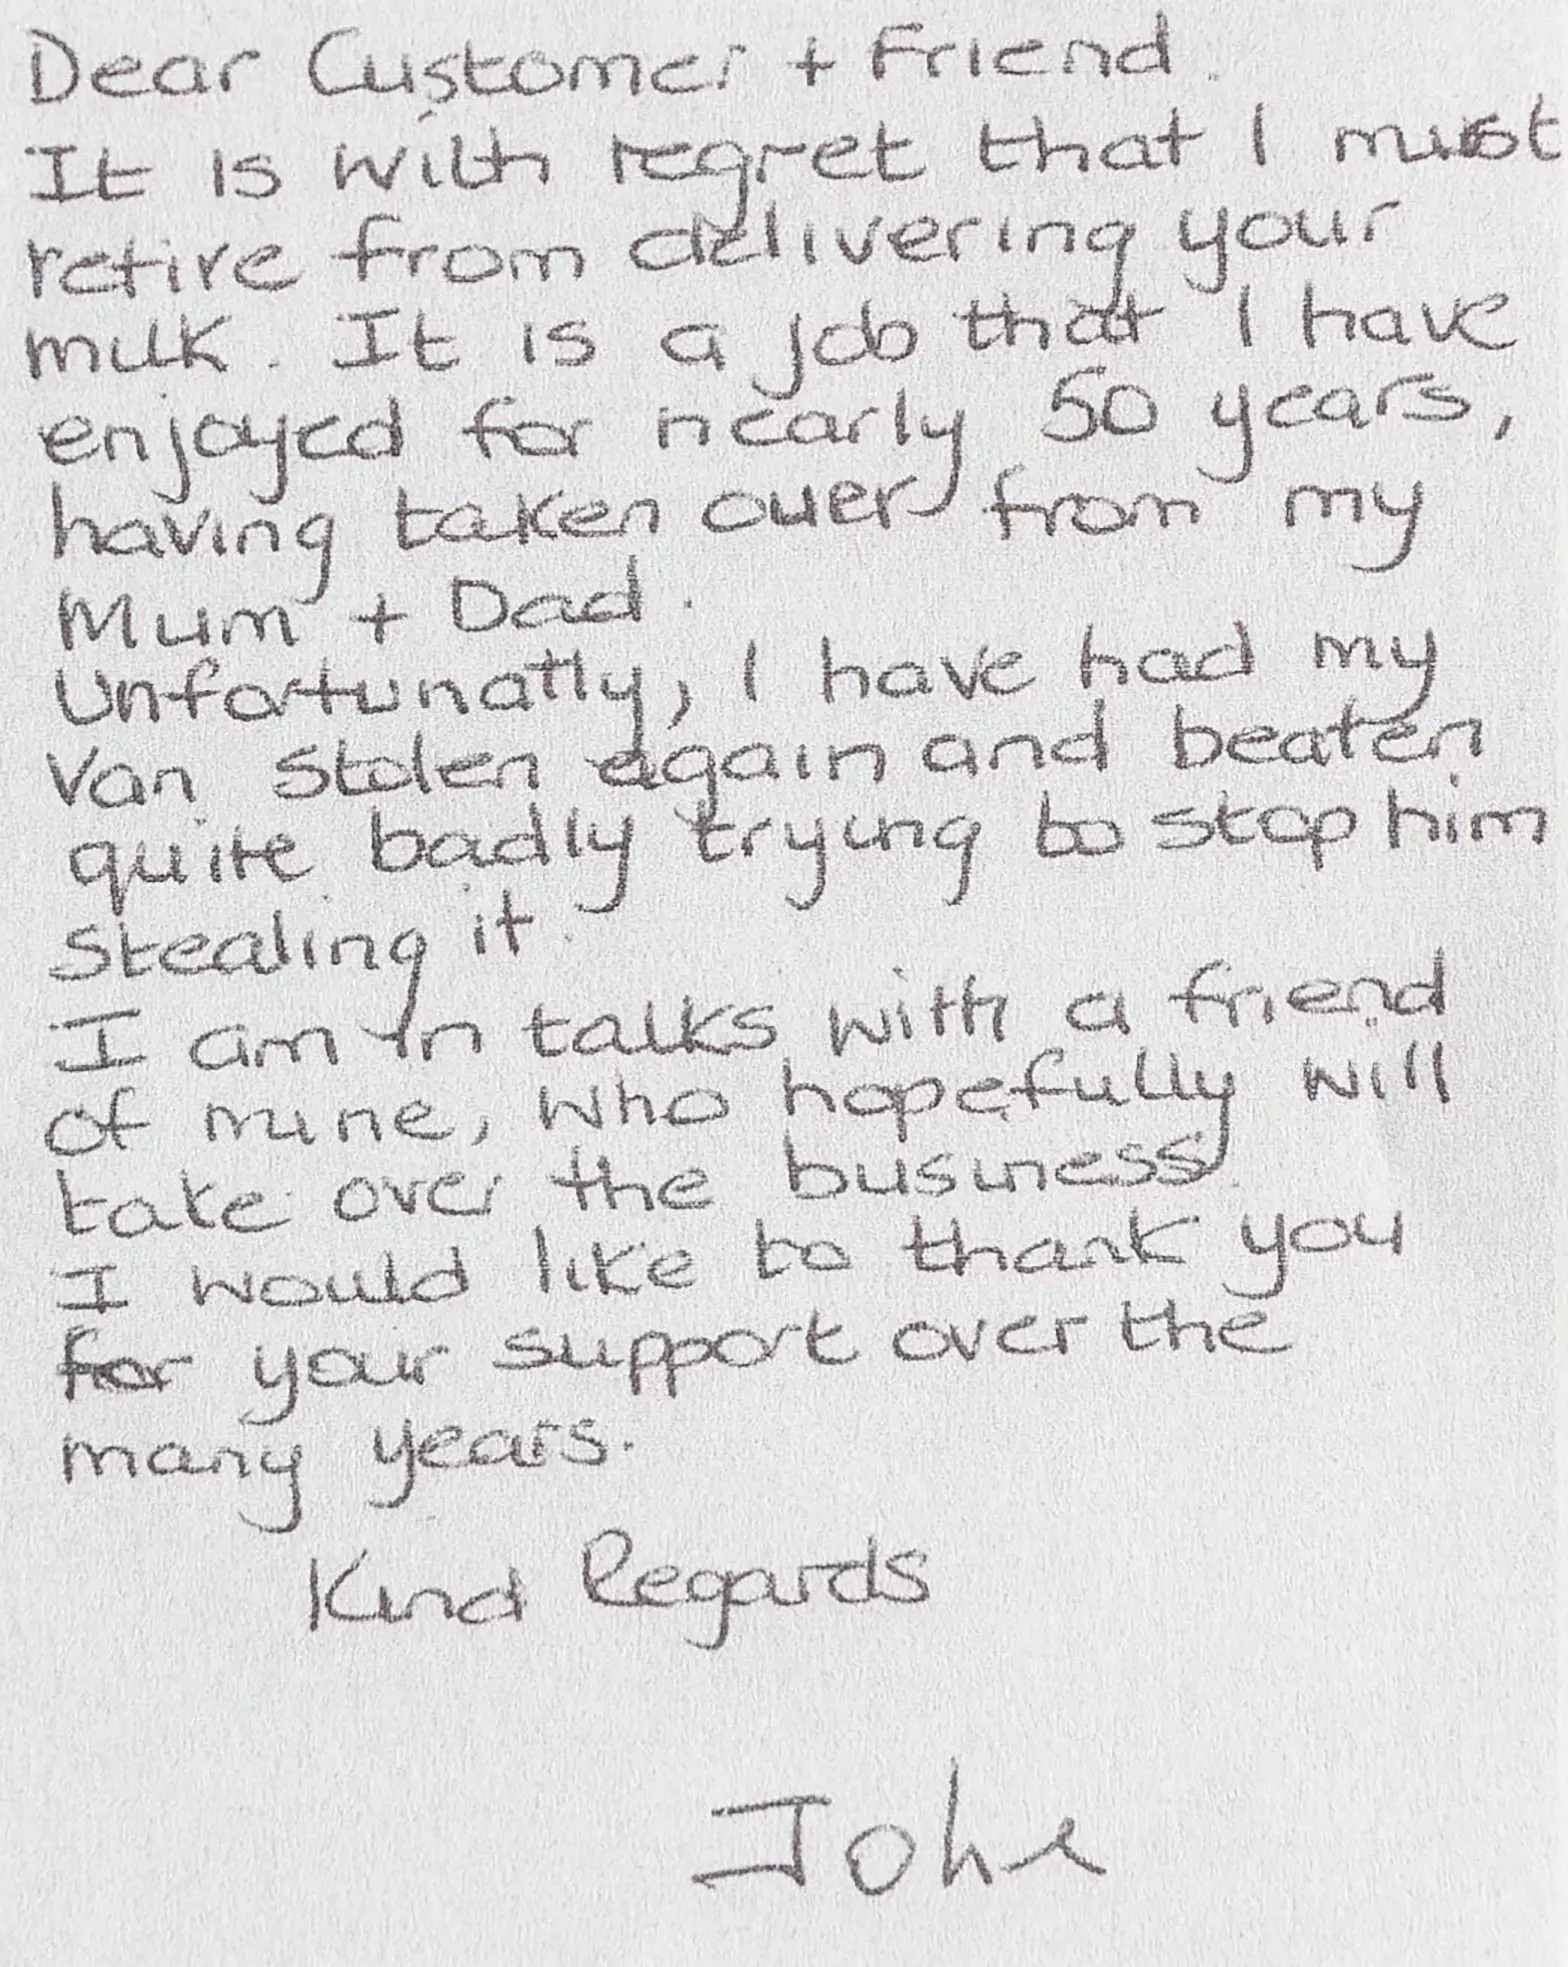 The heartbreaking letter that was sent to all of his 200 customers.